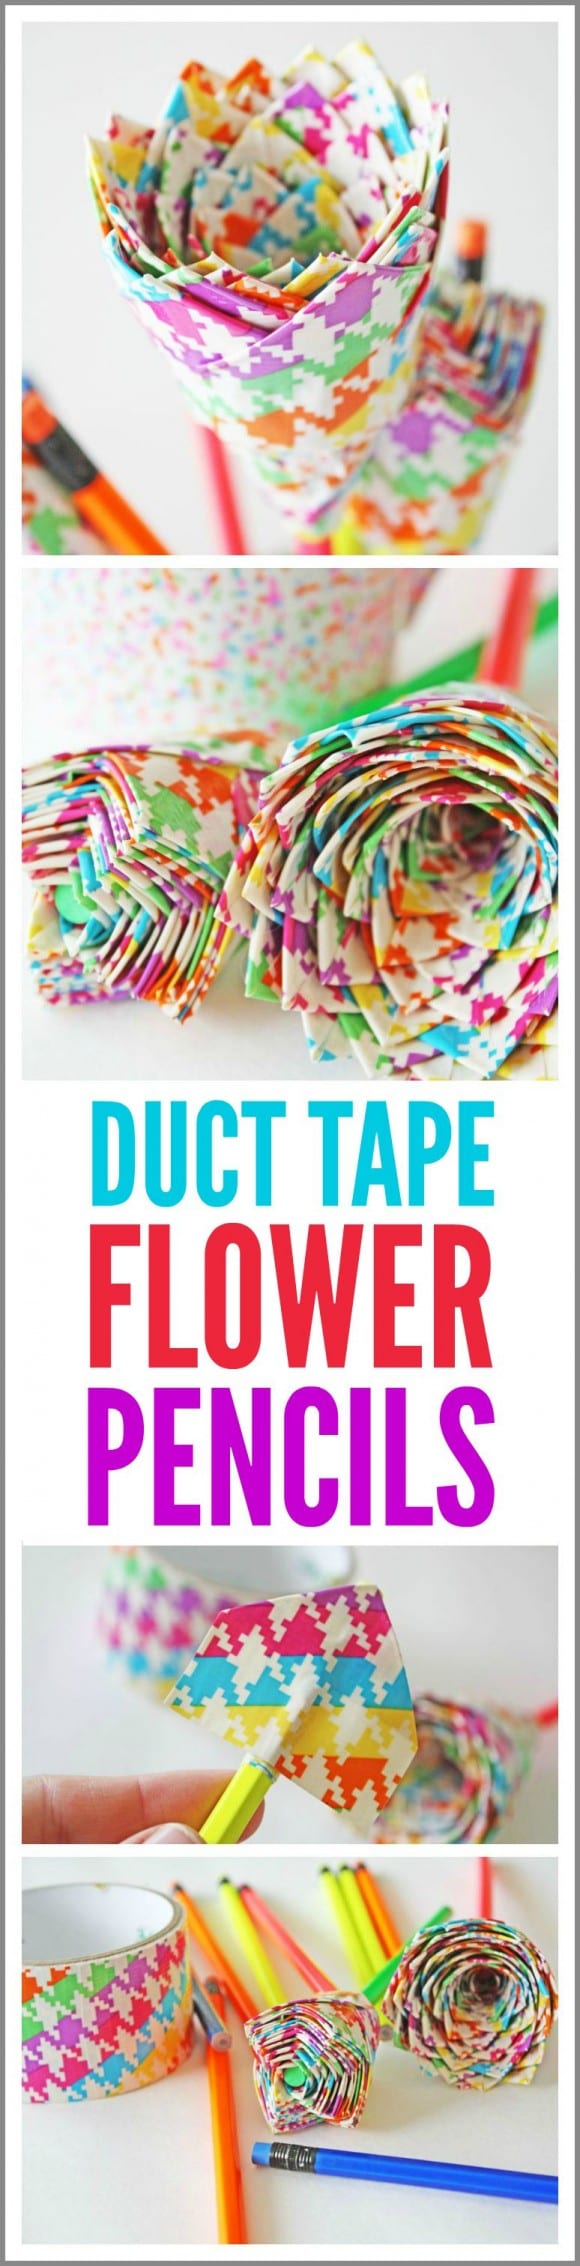 Duct Tape Flower Pencils DIY | CatchMyParty.com